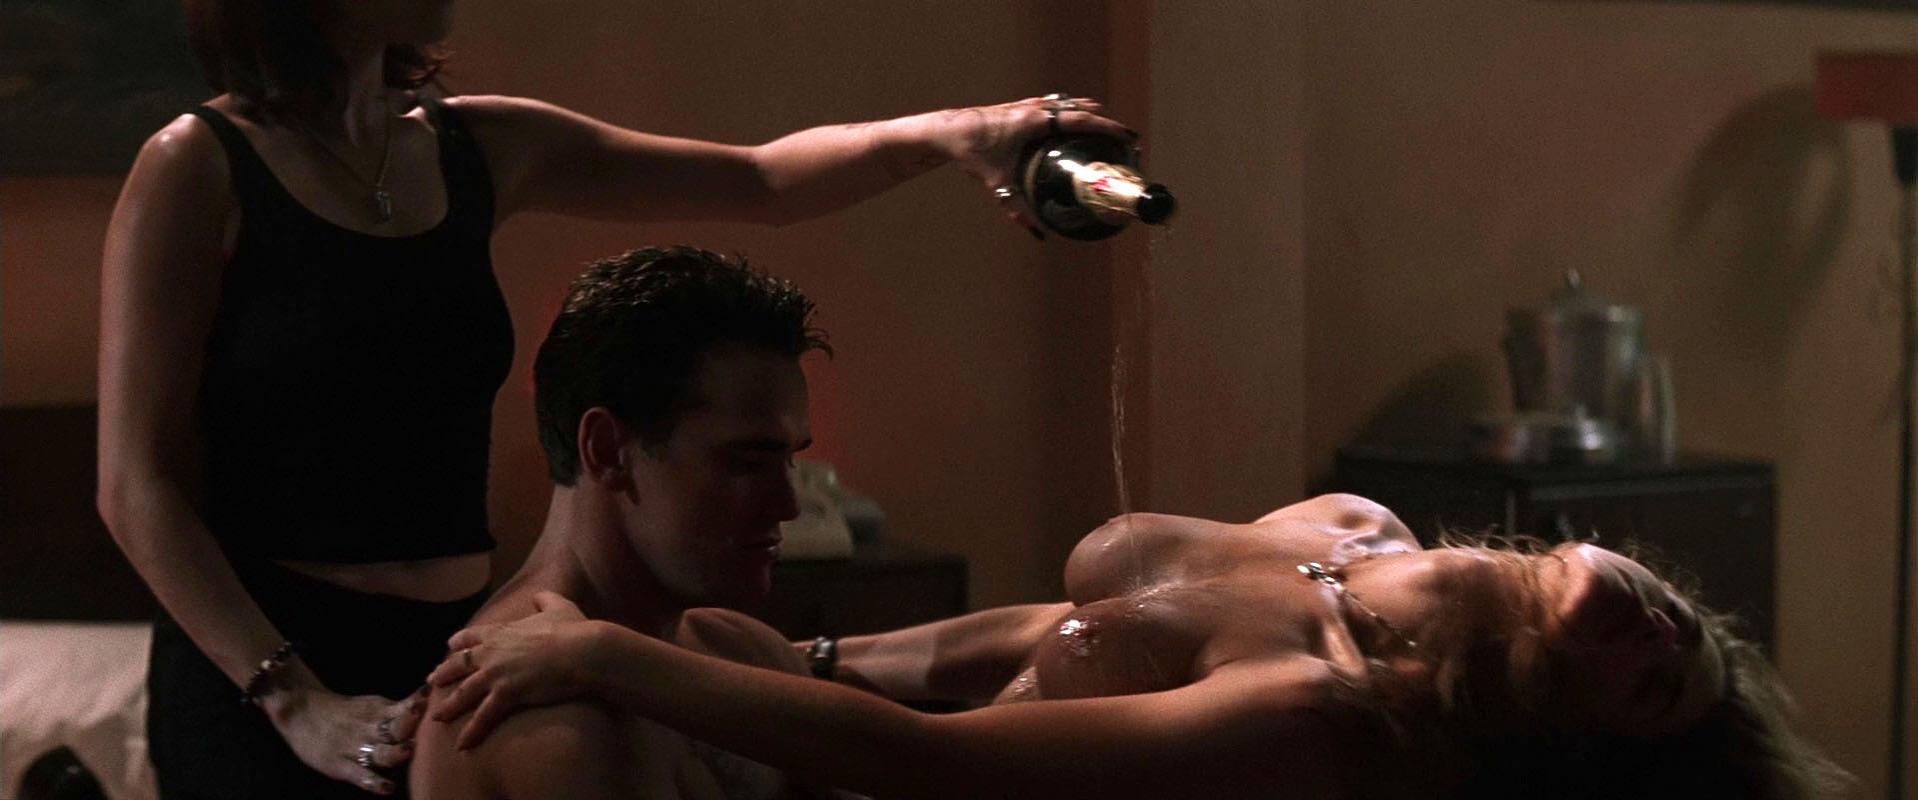 Denise Richards nude, Neve Campbell sexy - Wild Things (1998)